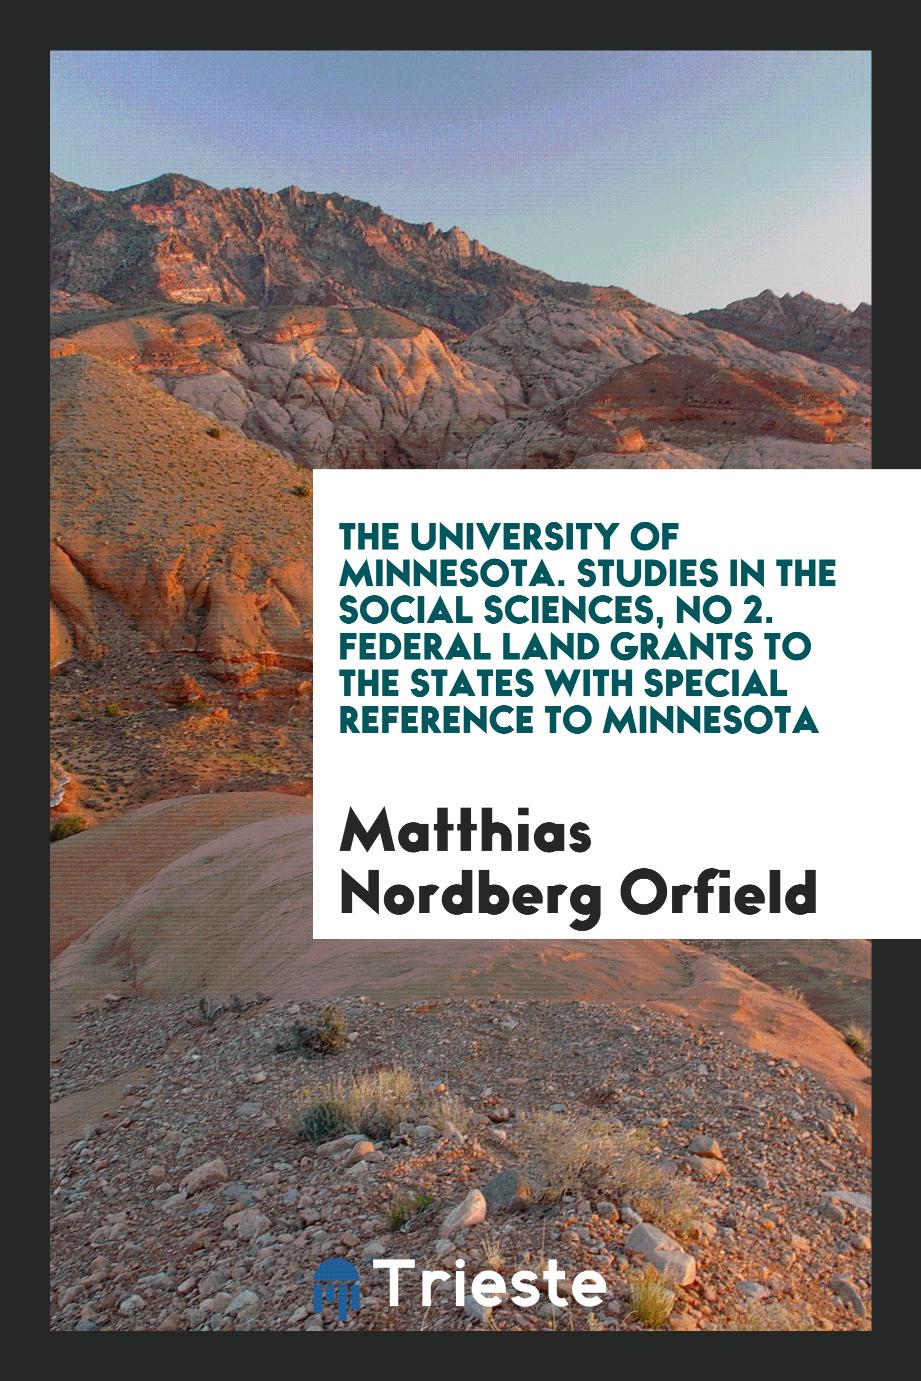 The University of Minnesota. Studies in the Social Sciences, No 2. Federal Land Grants to the States with Special Reference to Minnesota